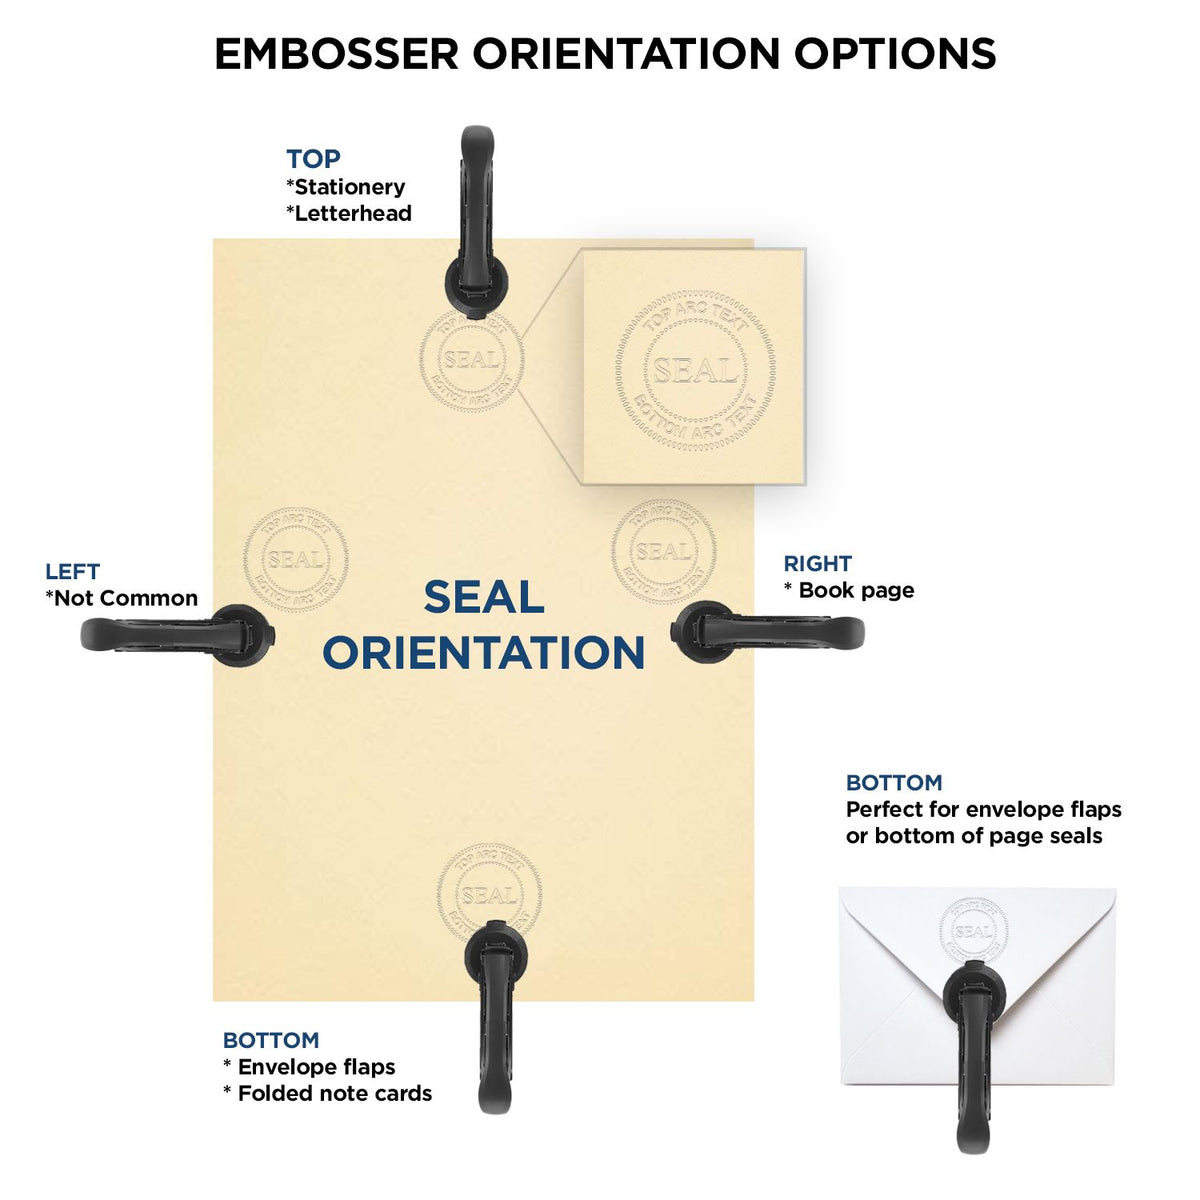 An infographic for the Hybrid Delaware Architect Seal showing embosser orientation, this is showing examples of a top, bottom, right and left insert.